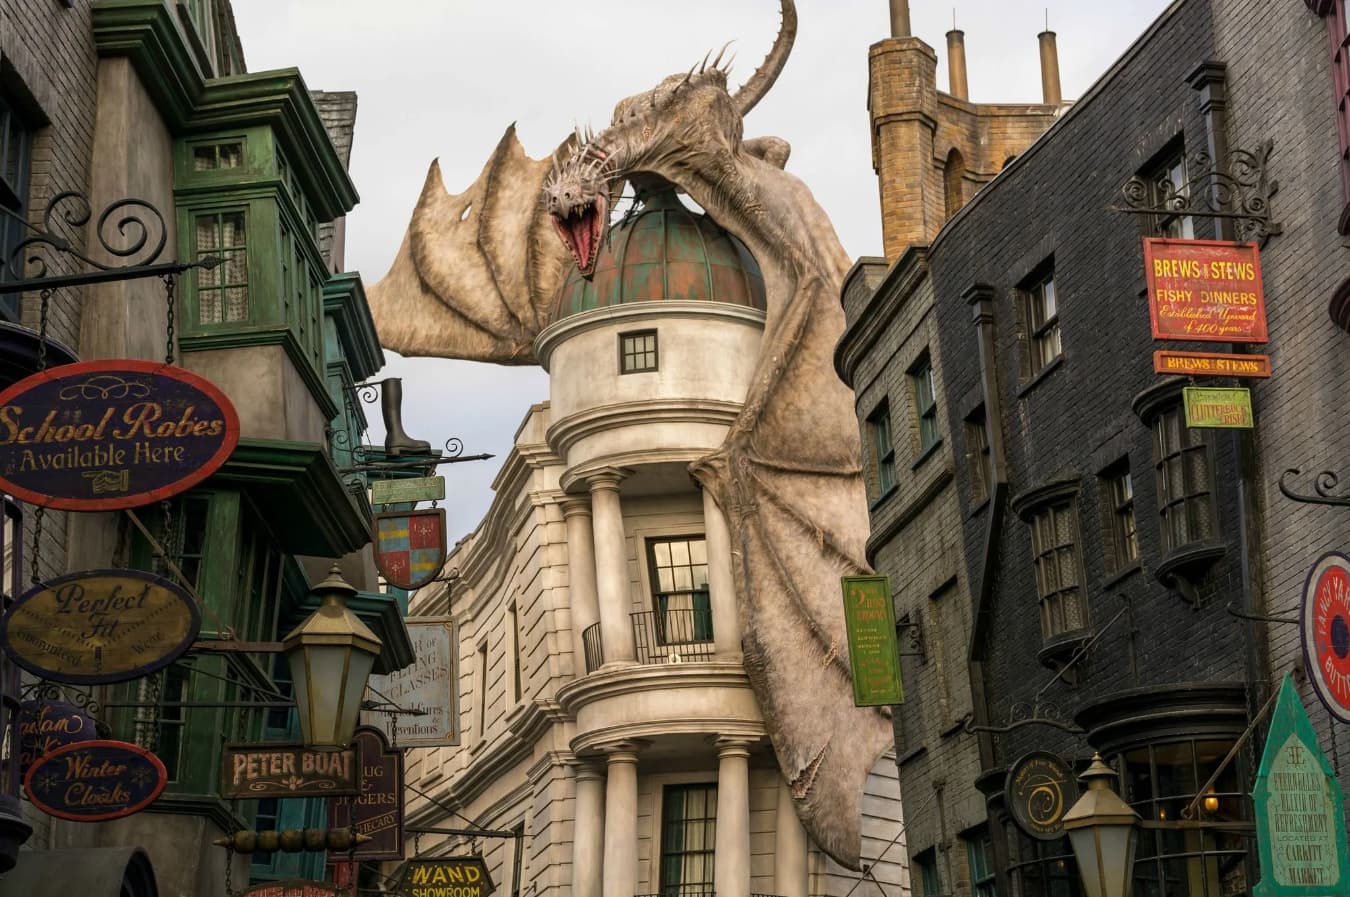 Diagon Alley - Wizarding World of Harry Potter